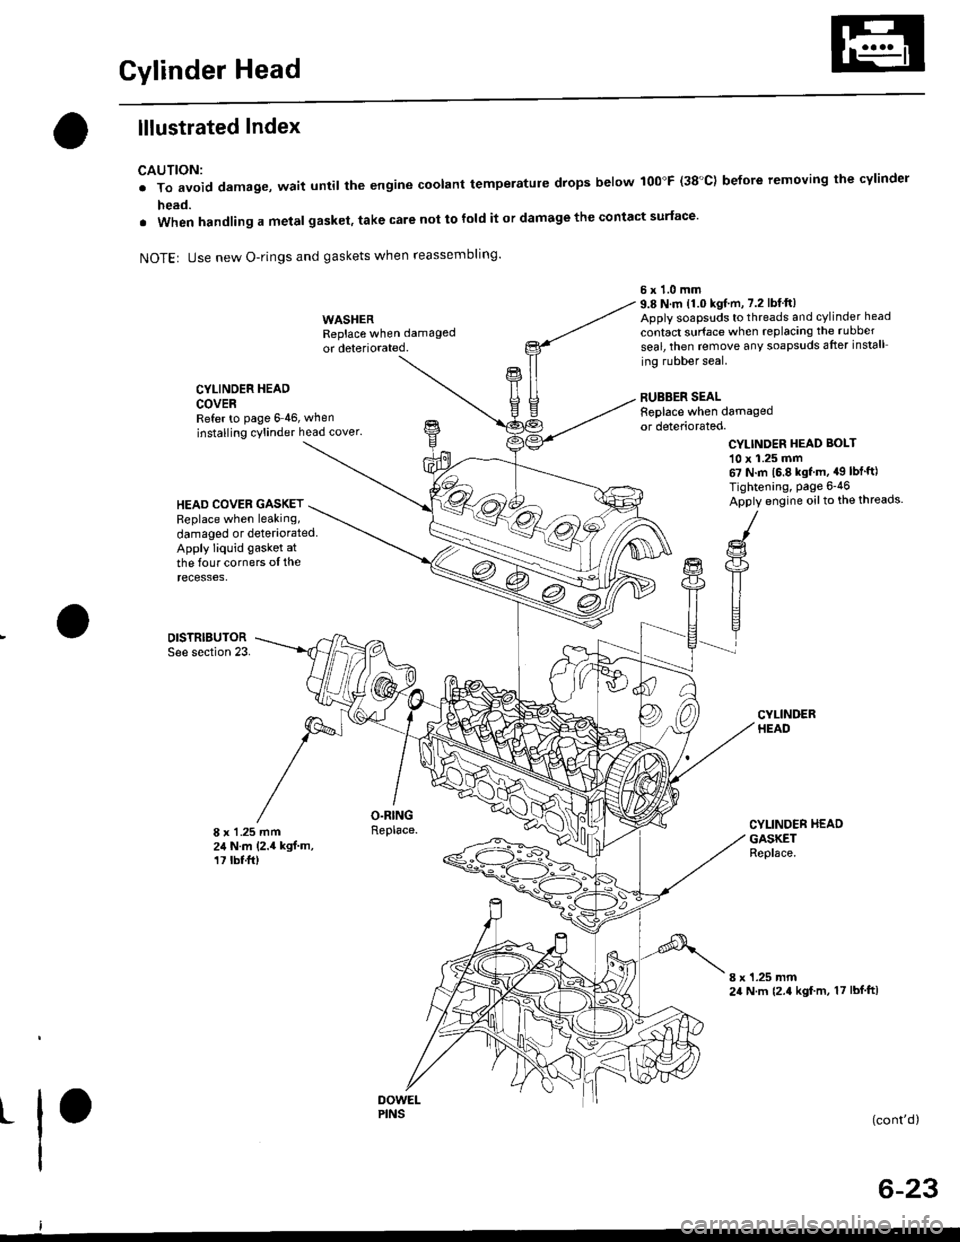 HONDA CIVIC 1997 6.G Manual PDF Gylinder Head
lllustrated Index
CAUTION:
. To avoid damage, wait until the engine coolant temperatule drops below 100"F (38C) before removing the cylinder
head.
. When handling a metal gasket, take c